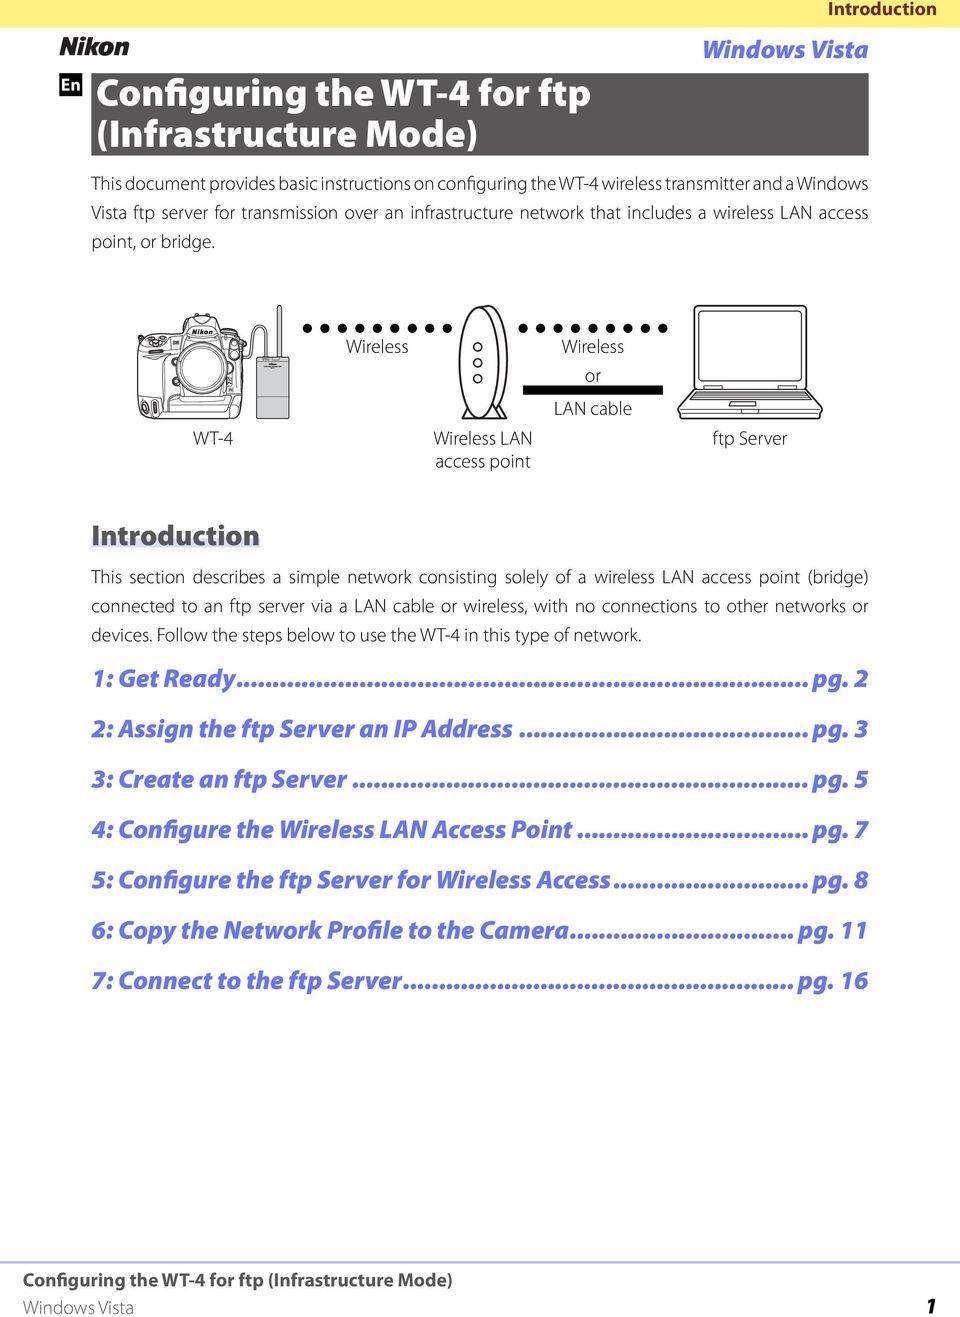 WT-4 Wireless Wireless LAN access point Wireless or LAN cable ftp Server Introduction This section describes a simple network consisting solely of a wireless LAN access point (bridge) connected to an